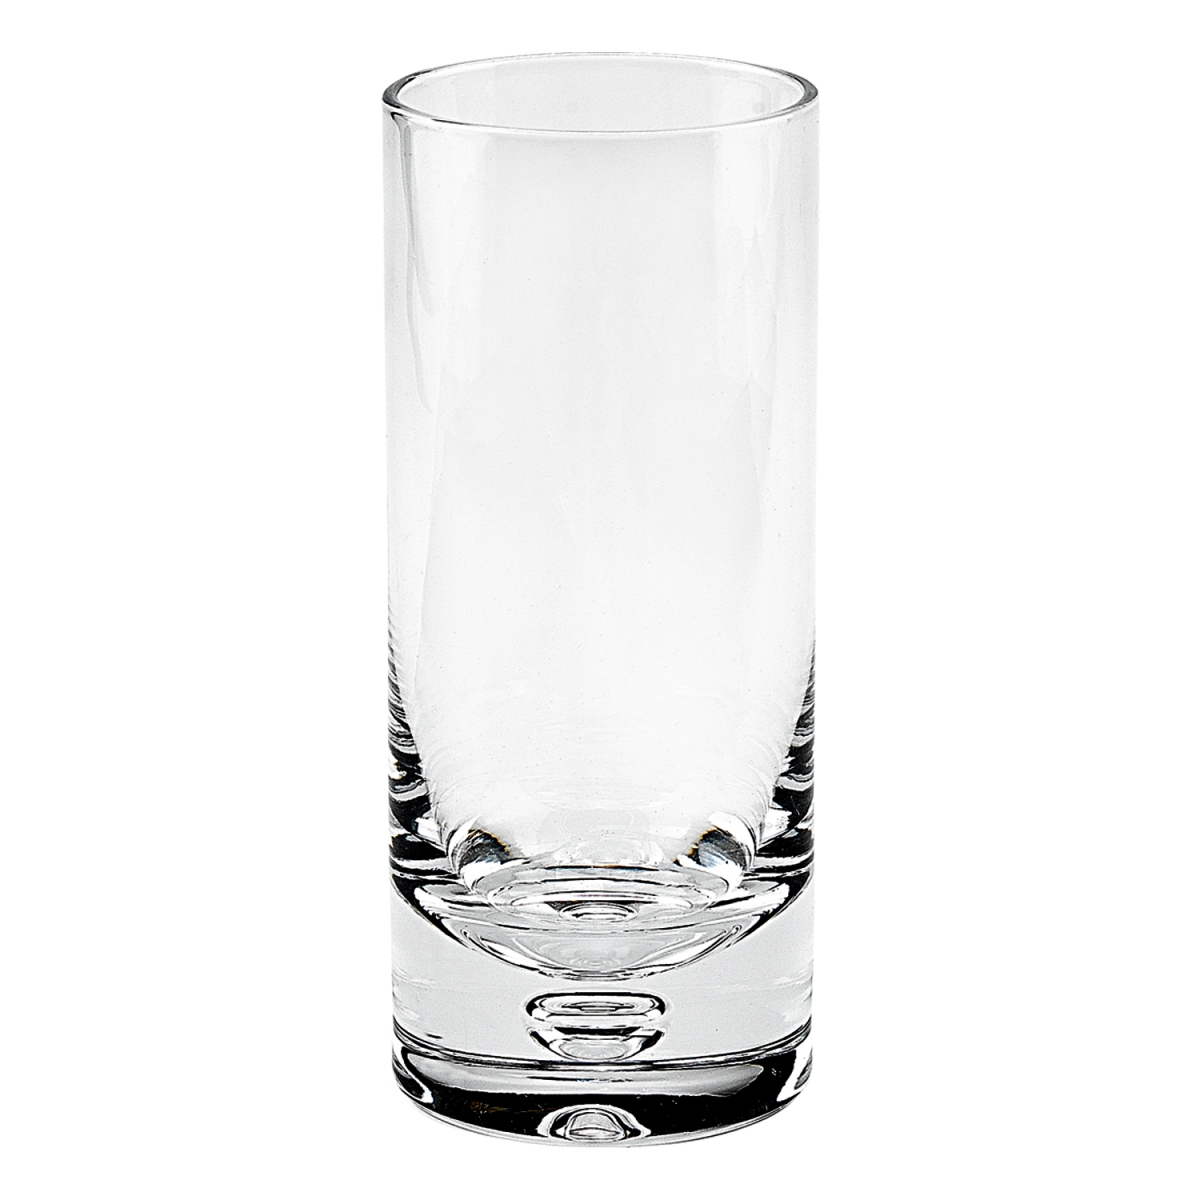 Picture of HomeRoots 375904 13 oz 13 oz Mouth Blown Crystal Lead Free Hiball Glass - 4 Piece